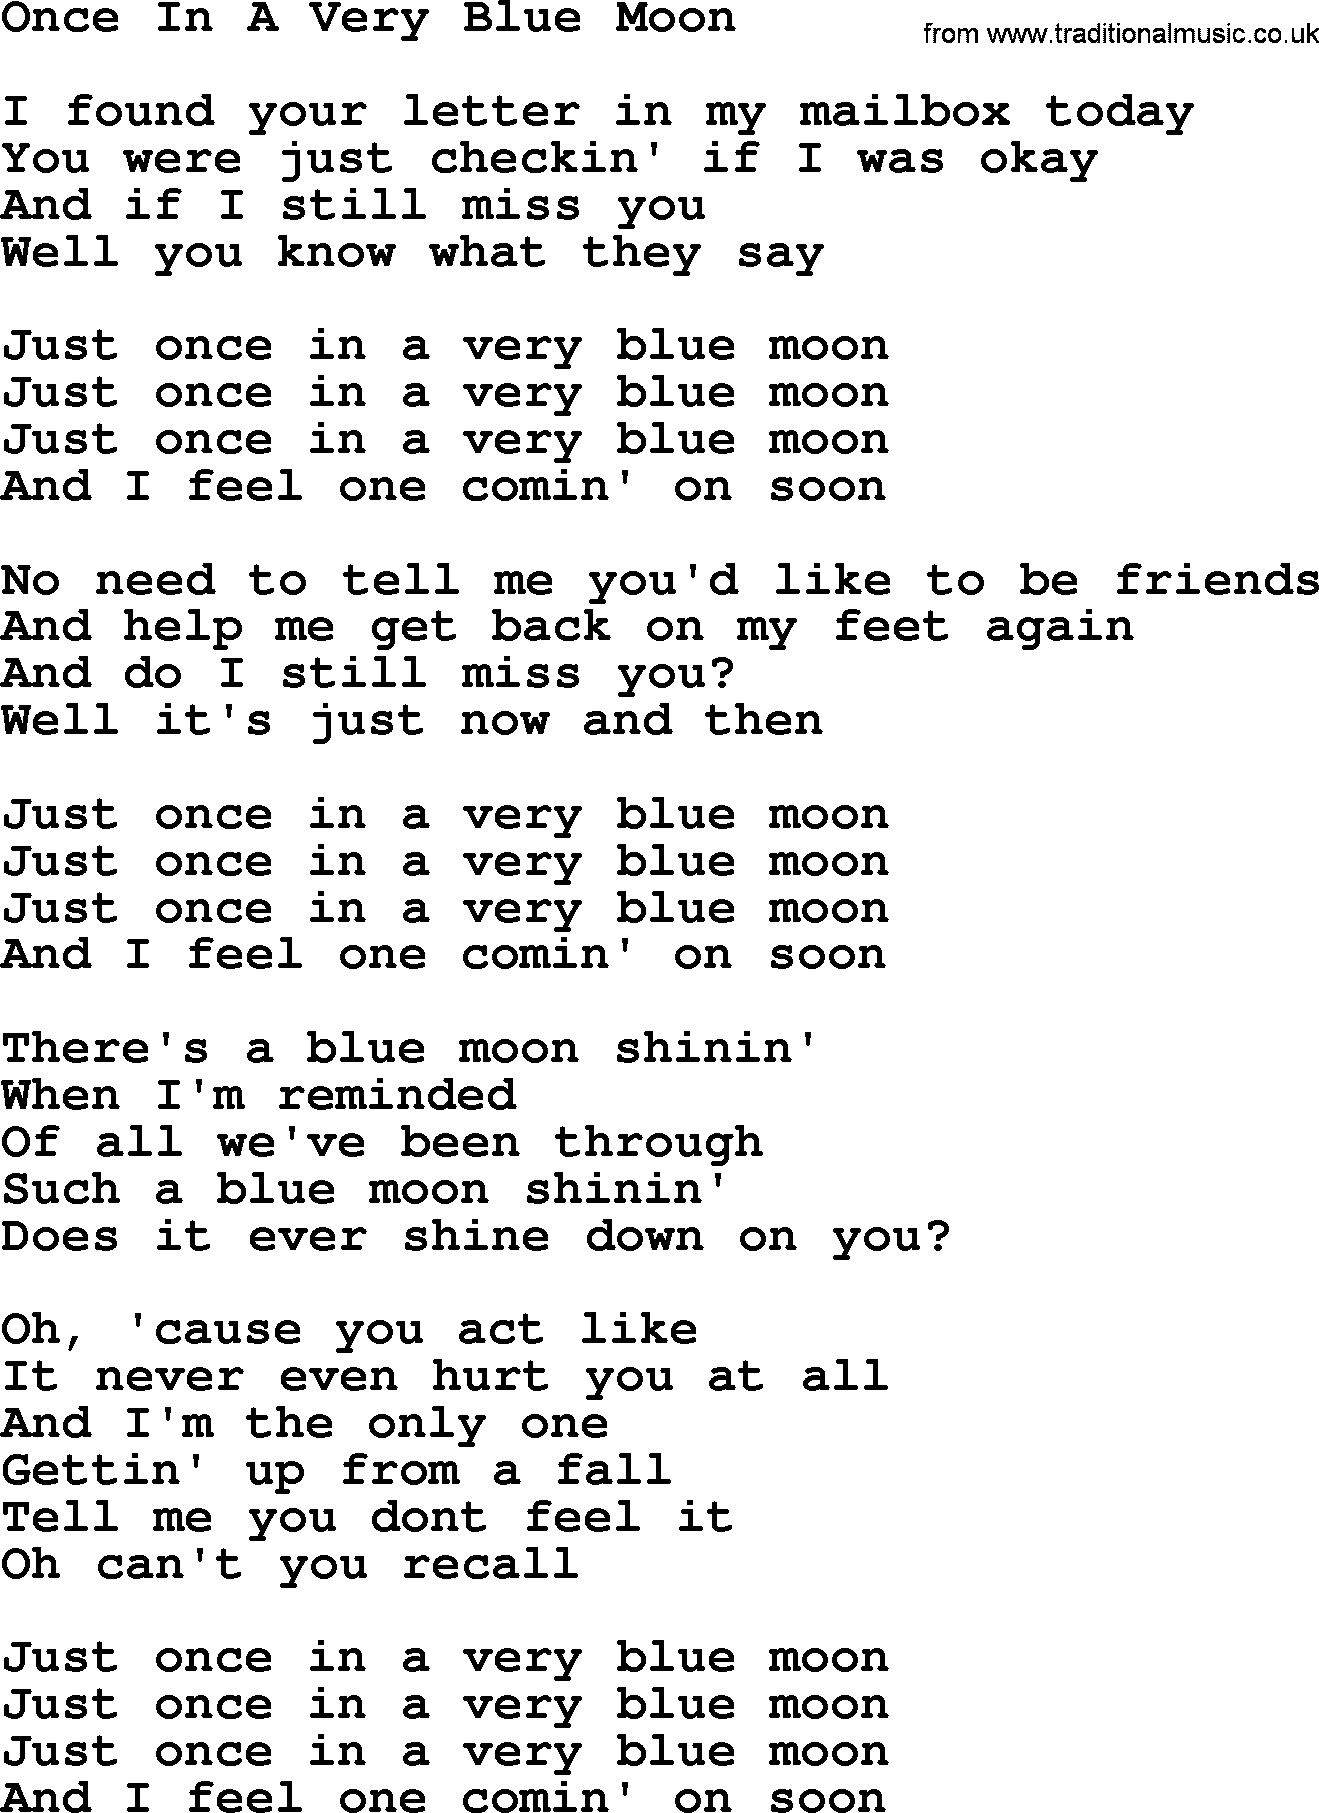 Dolly Parton song Once In A Very Blue Moon.txt lyrics